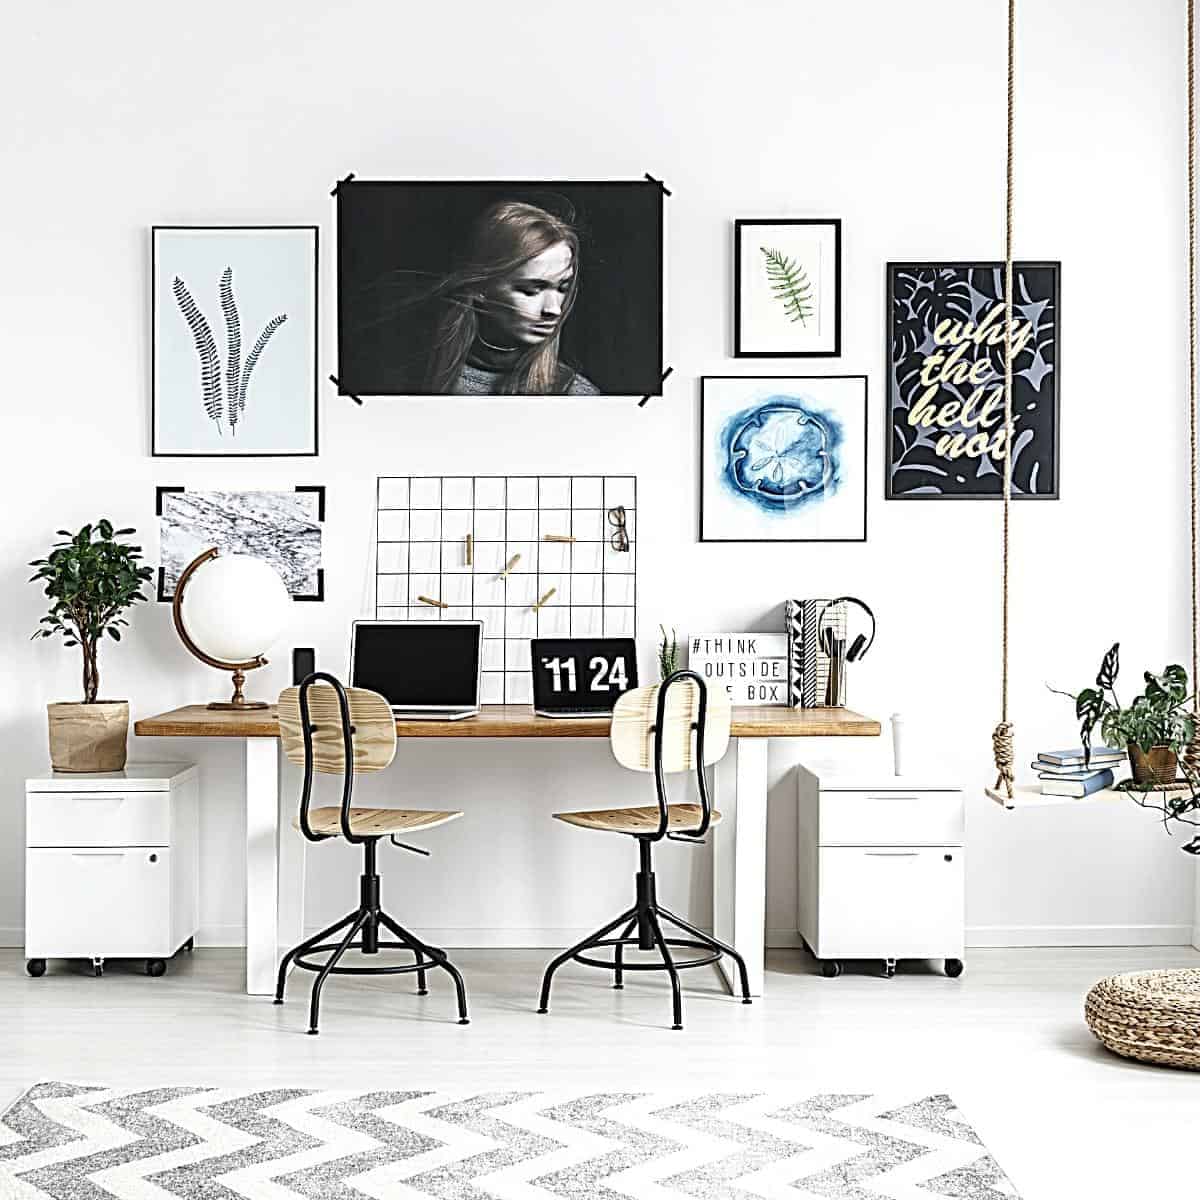 Styling your home office